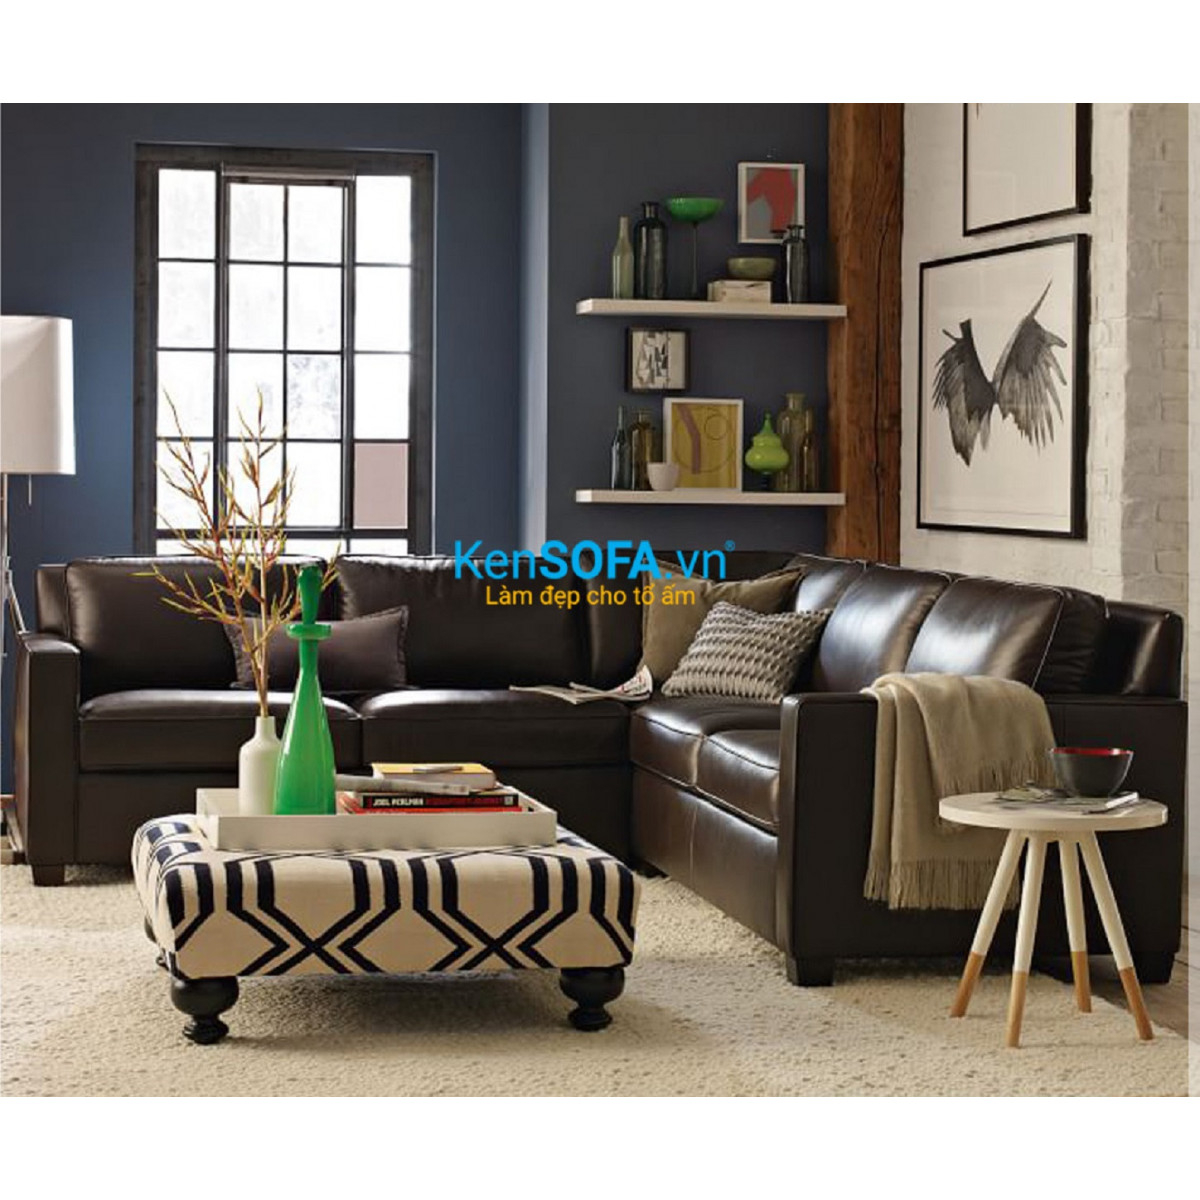 Henry leather sectional